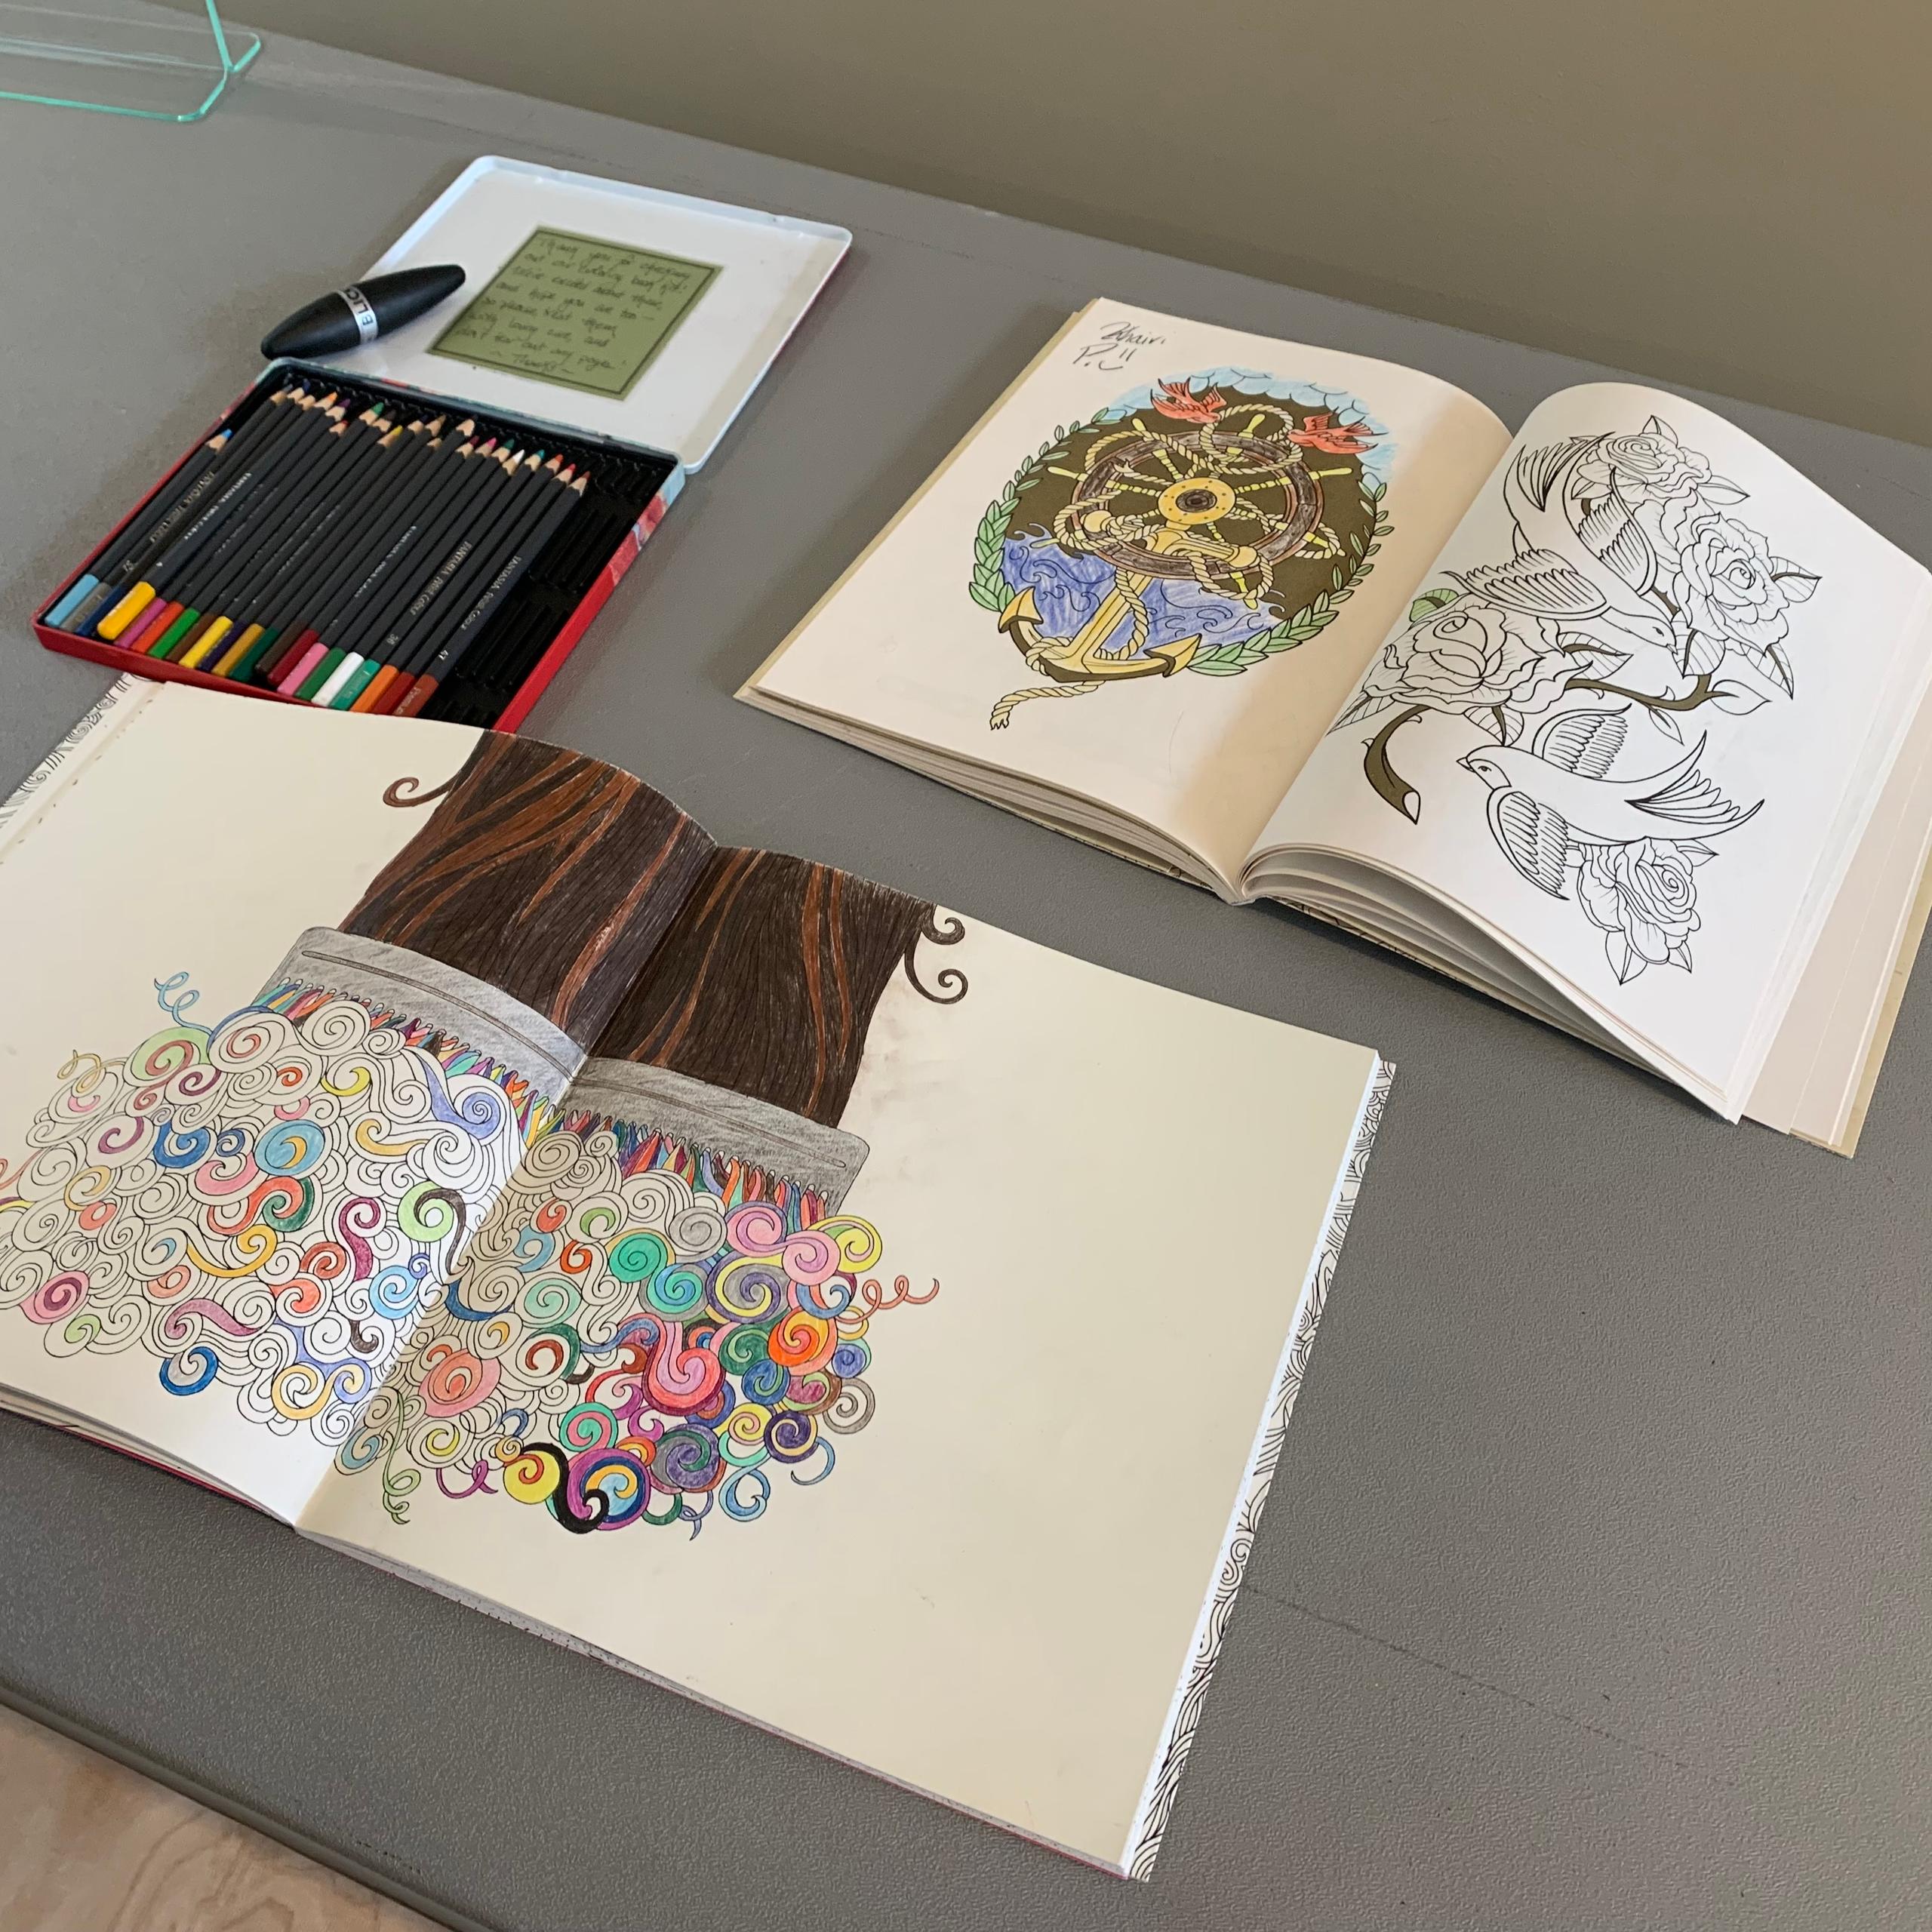 Coloring books on a table.